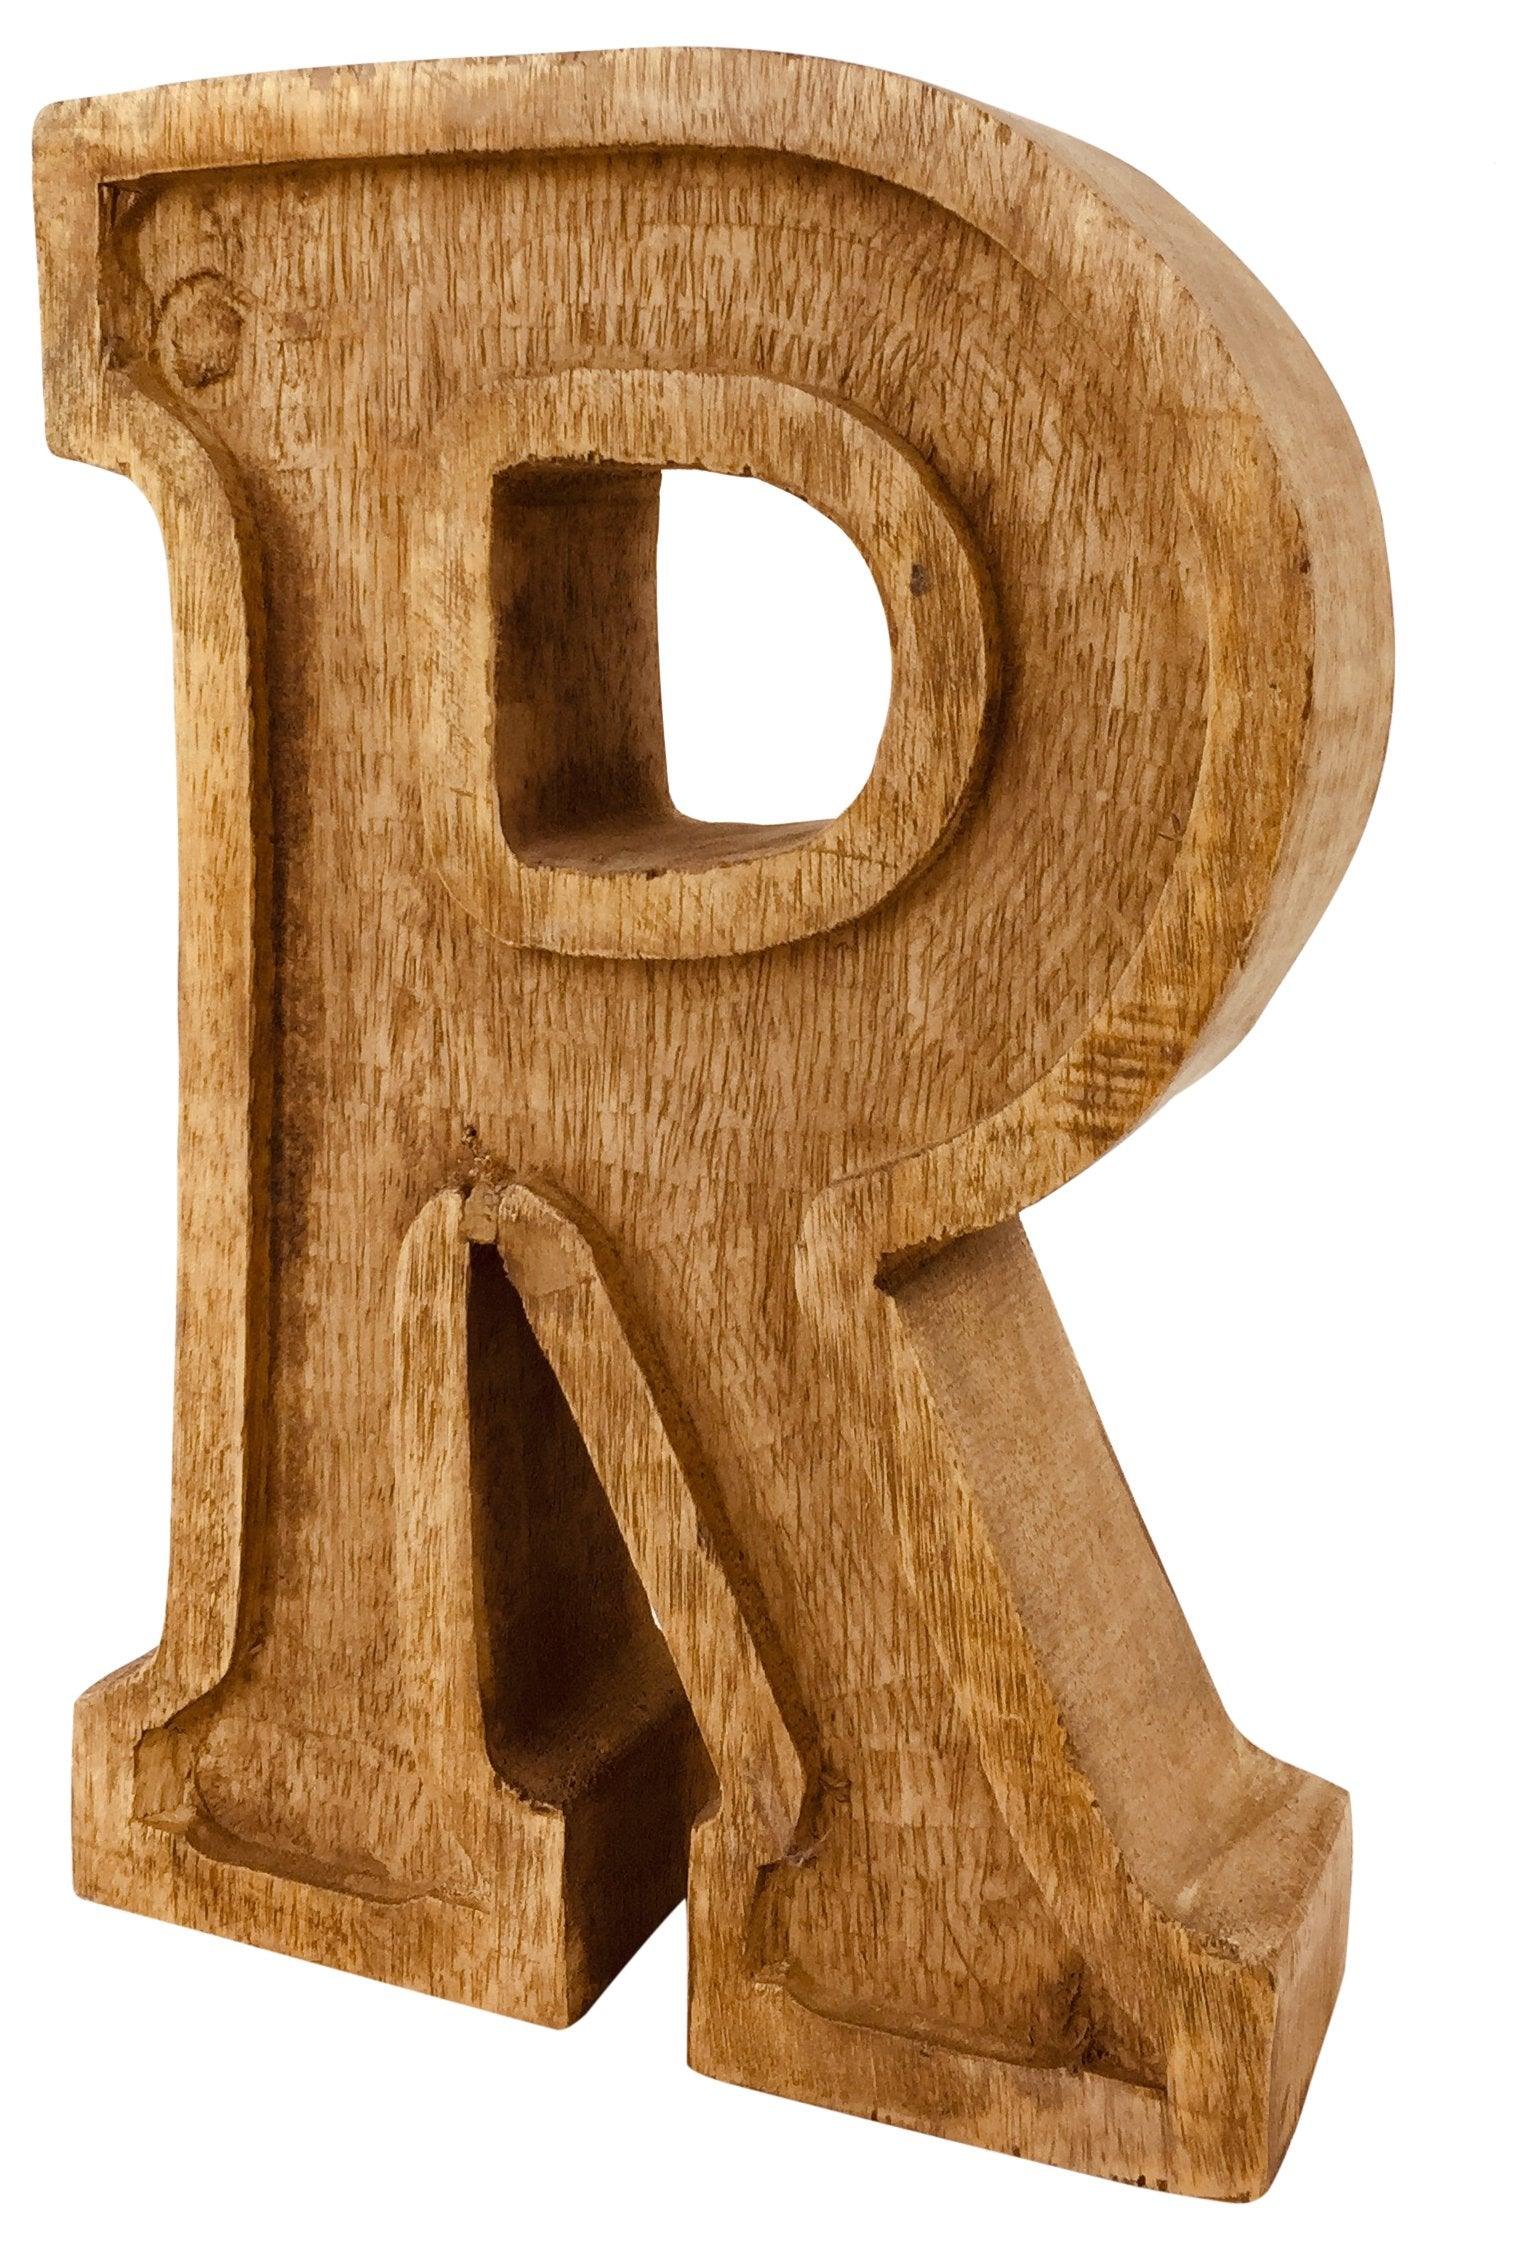 View Hand Carved Wooden Embossed Letter R information